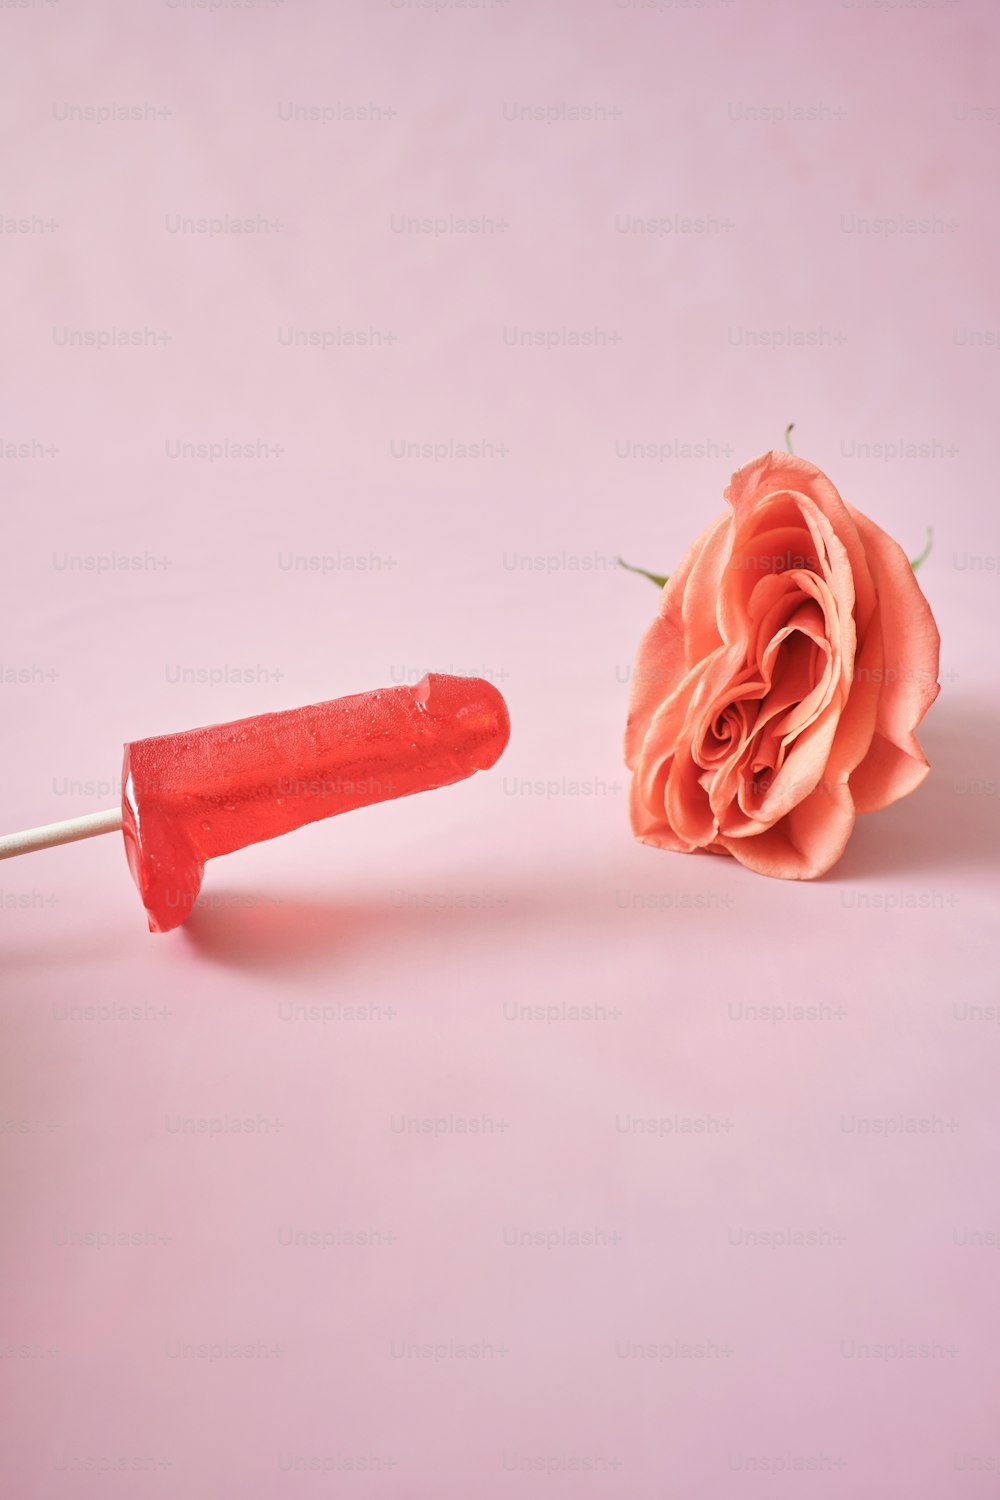 a pink rose and a red plastic object on a pink background